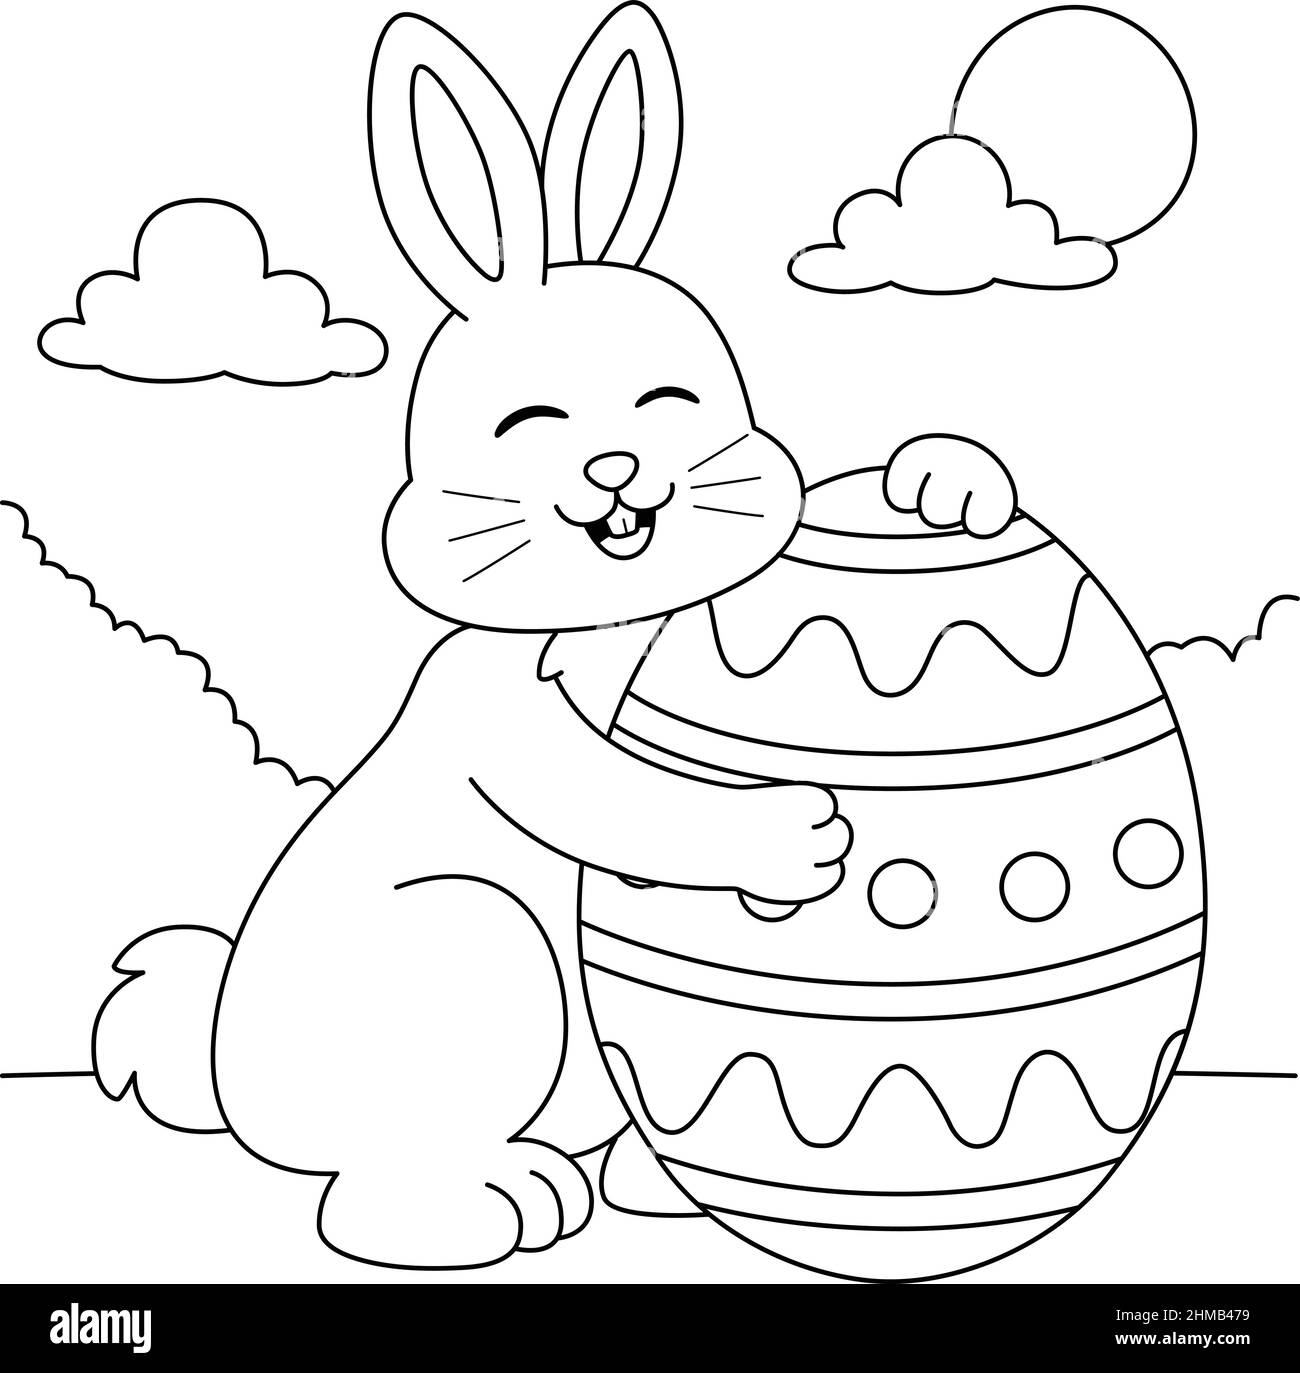 Rabbit Hugging Easter Egg Coloring Page for Kids Stock Vector ...